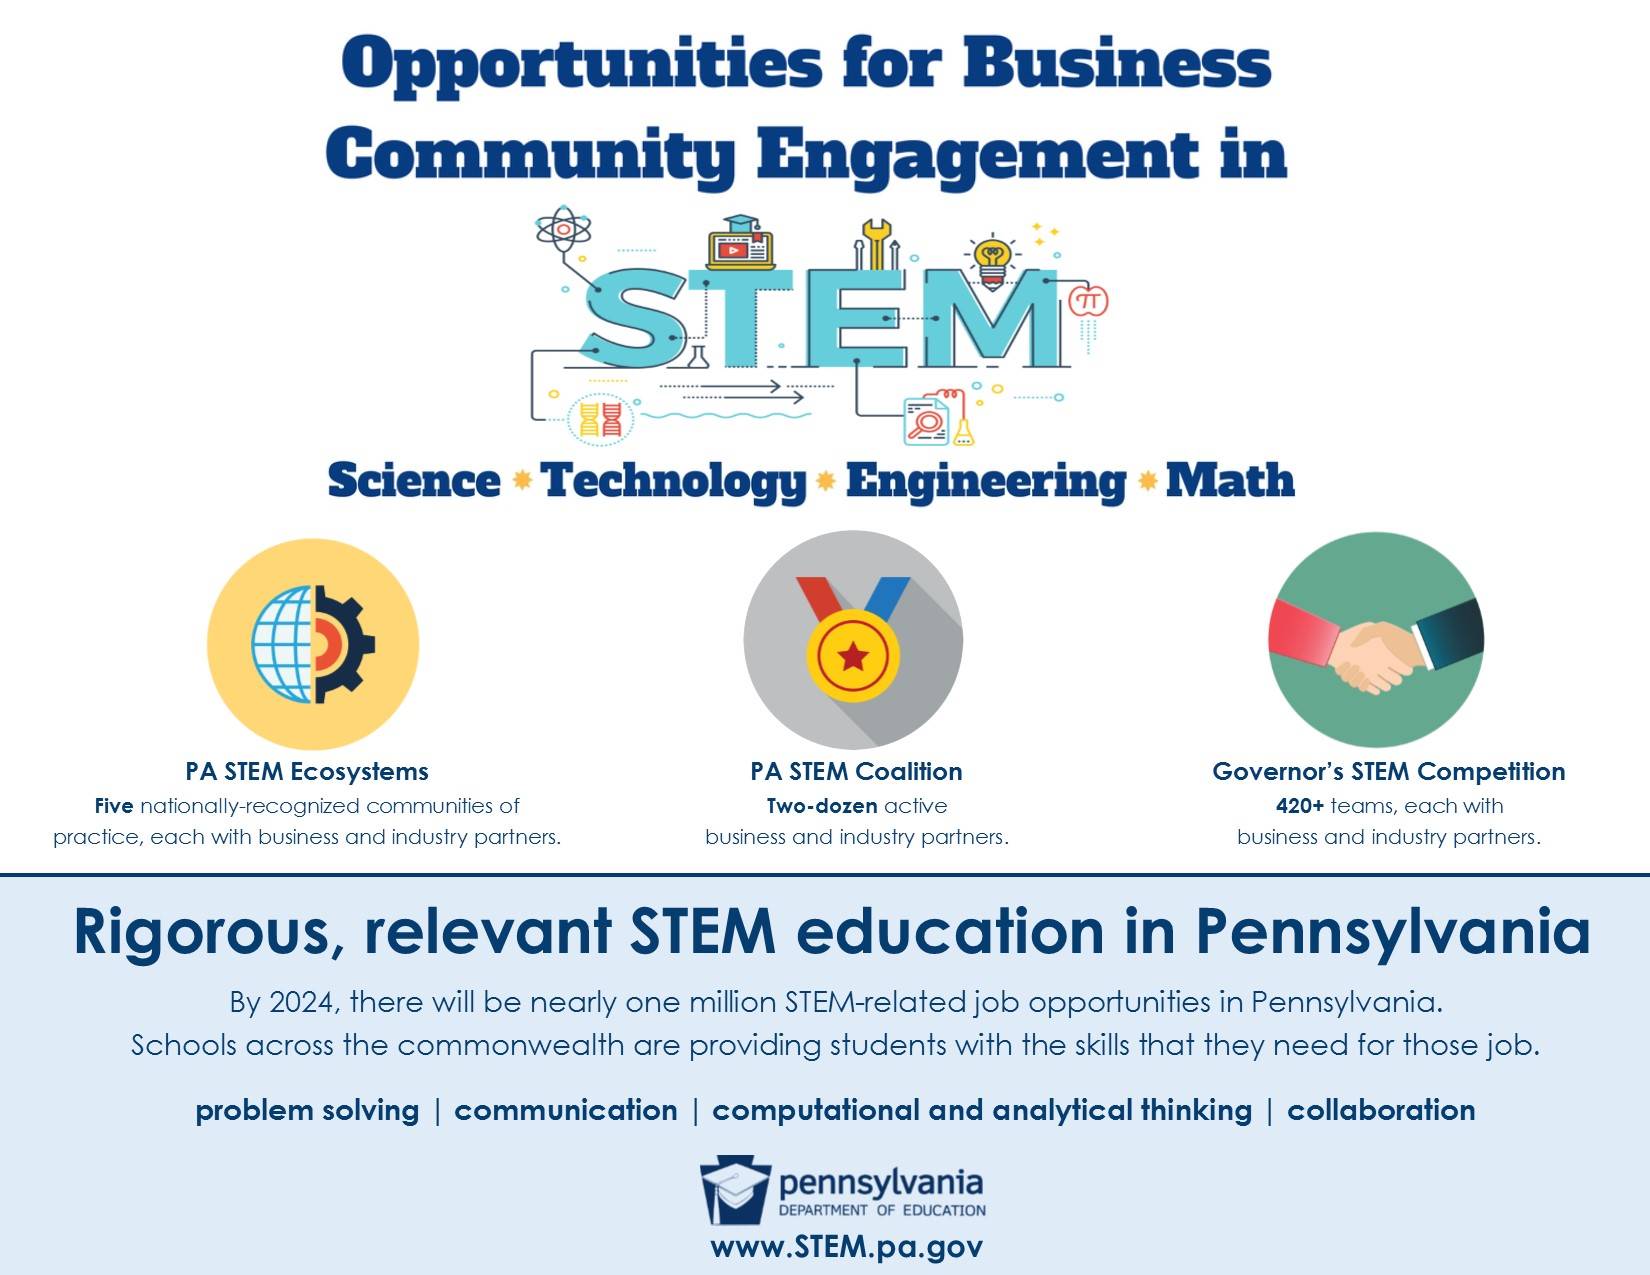 STEM Education Opportunities for Business